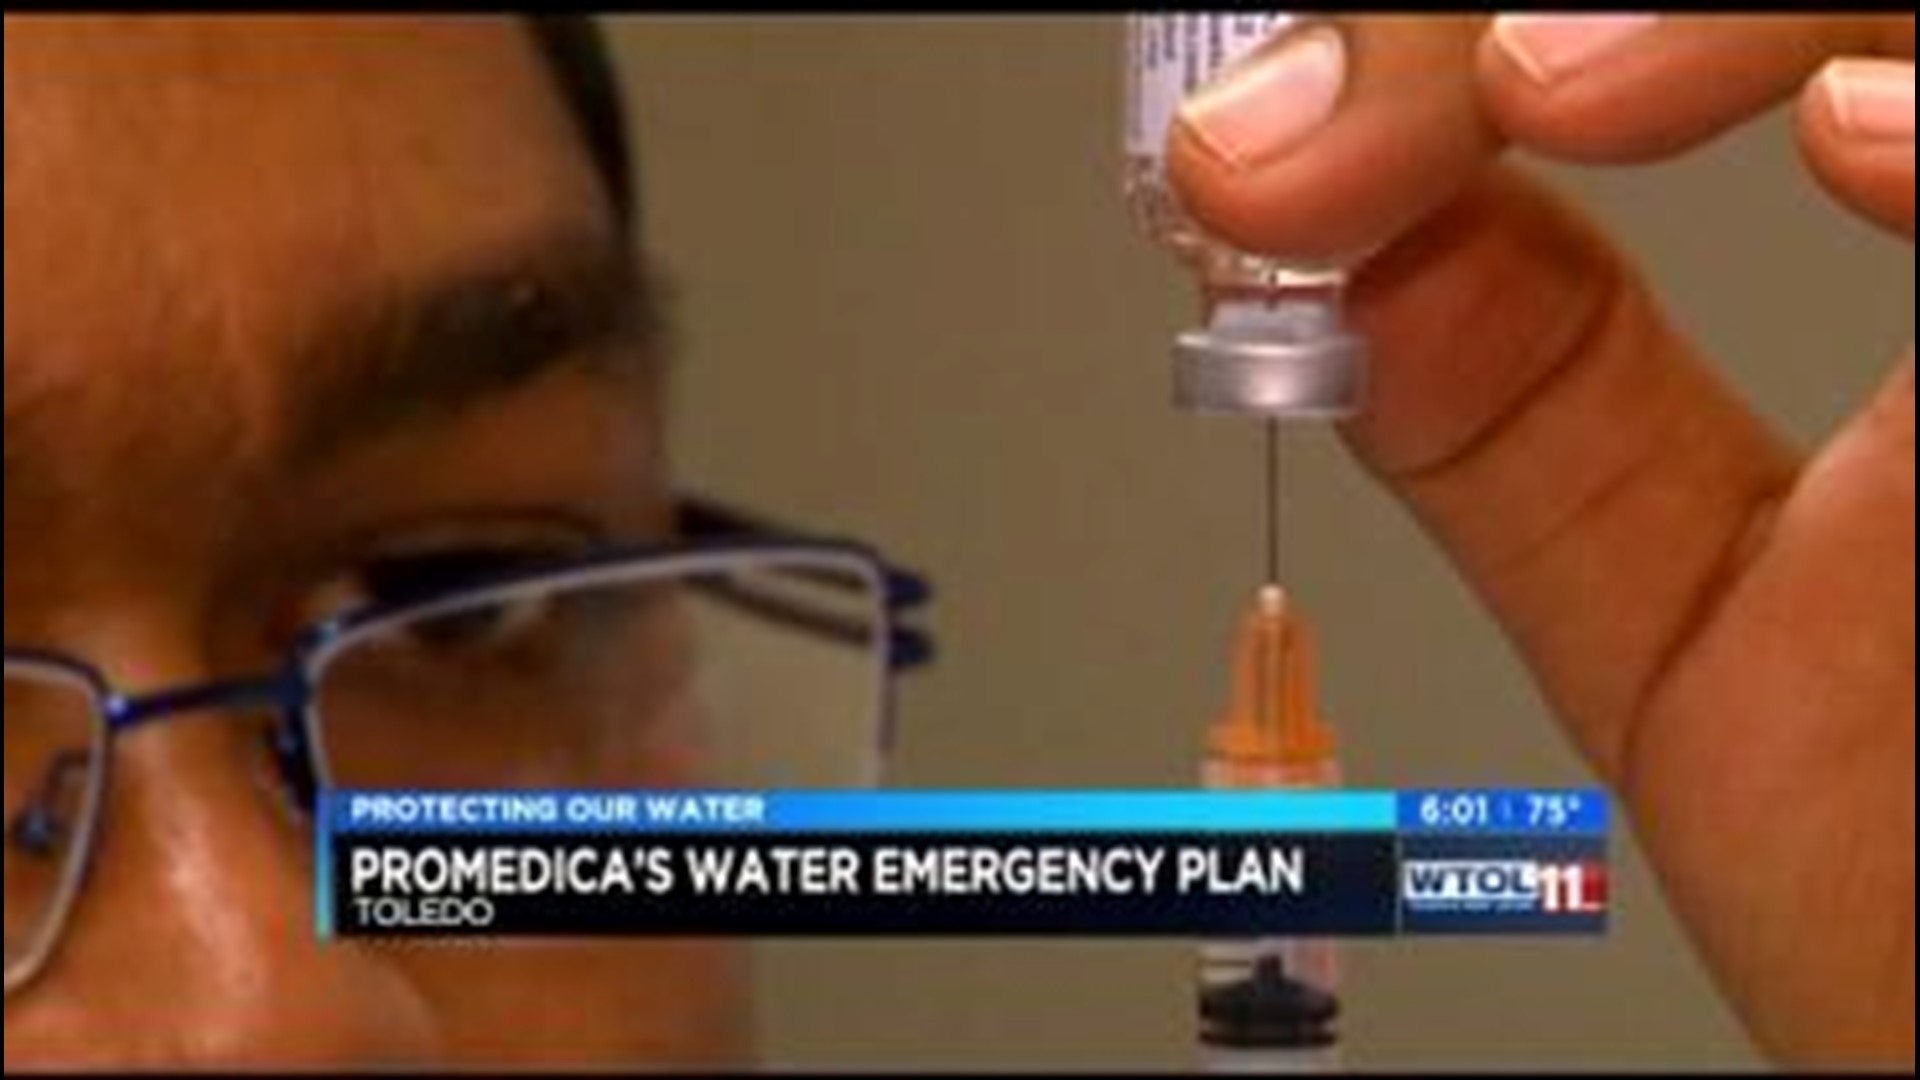 ProMedica is ready for any changes in the water